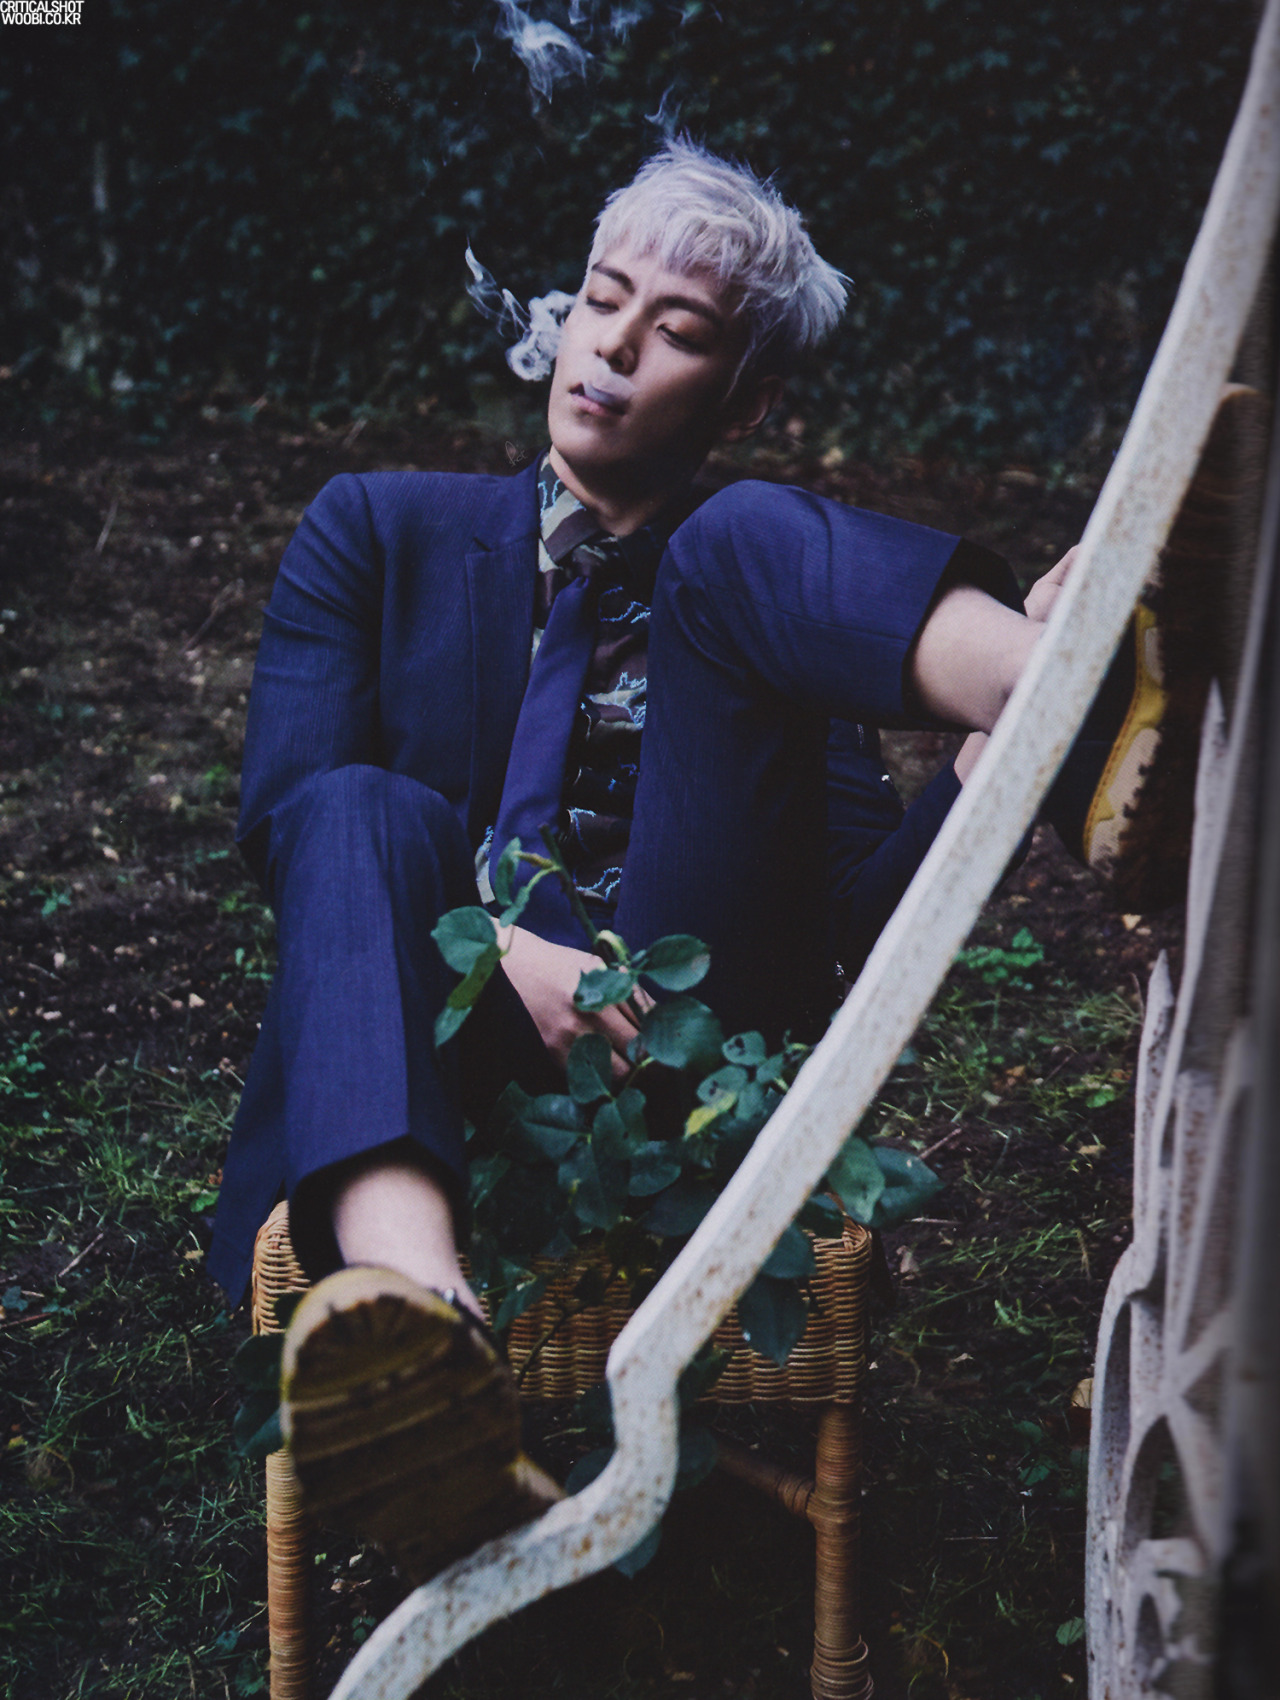 TOP Arena Homme March 2016 scans by CriticalShot (7).png